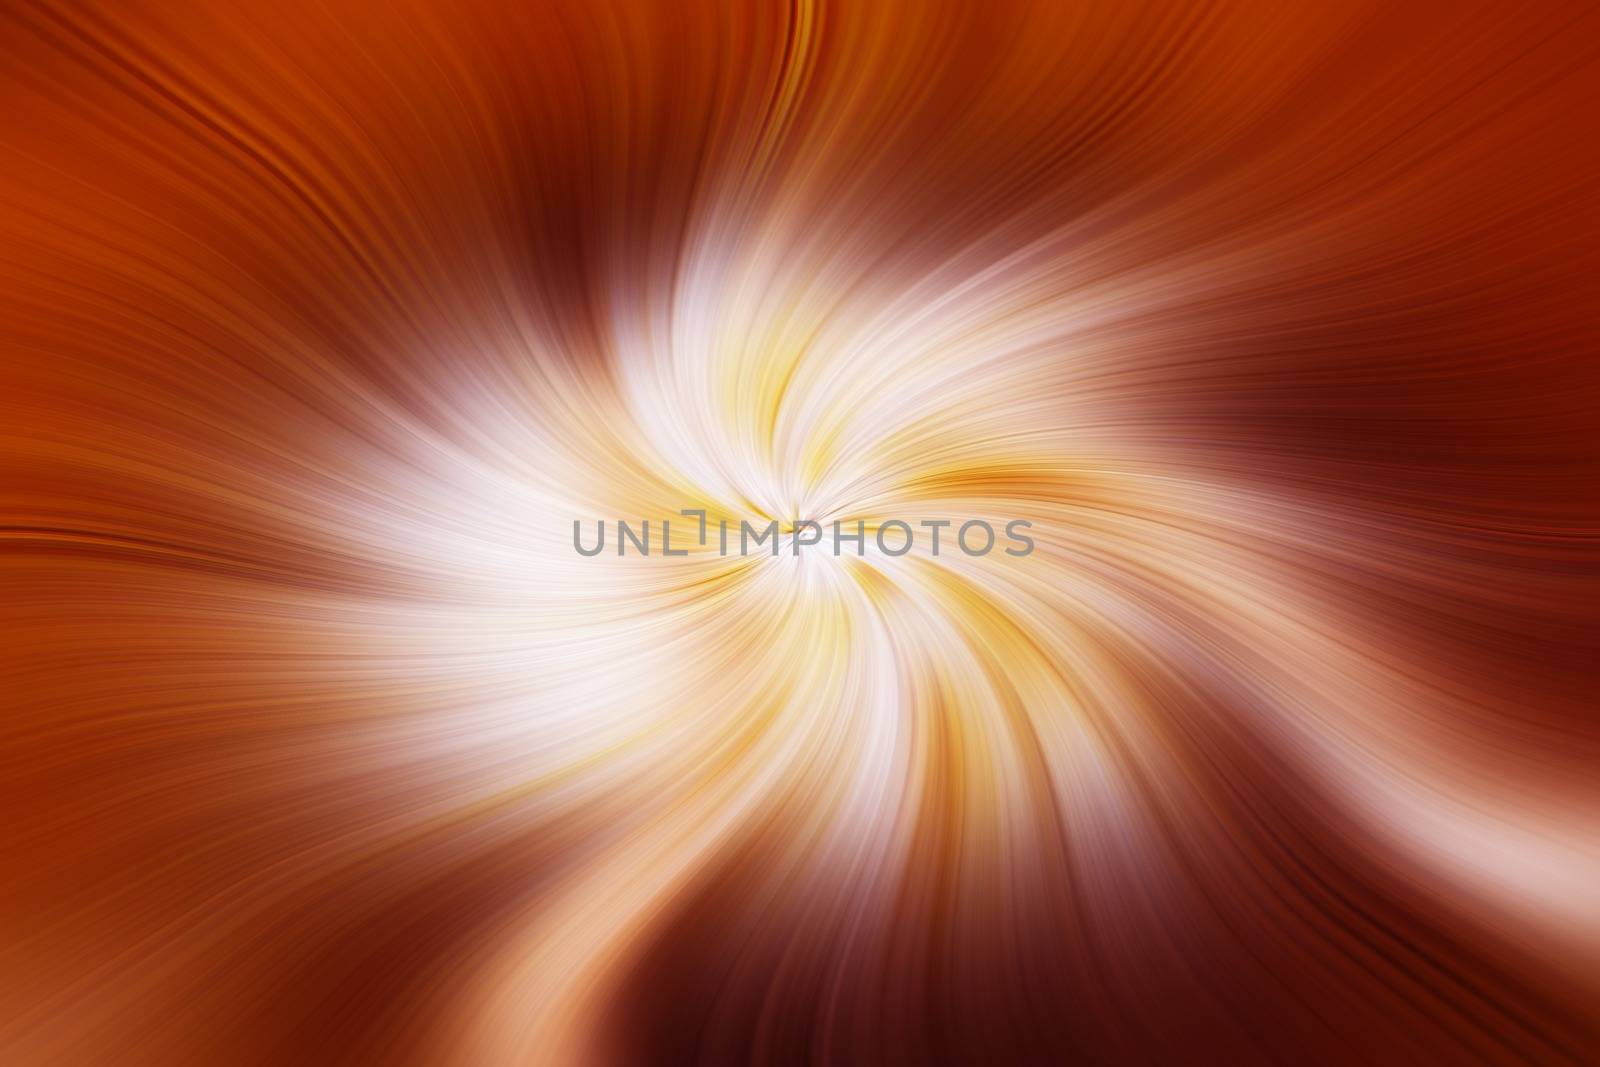 Abstract image with colored twirl